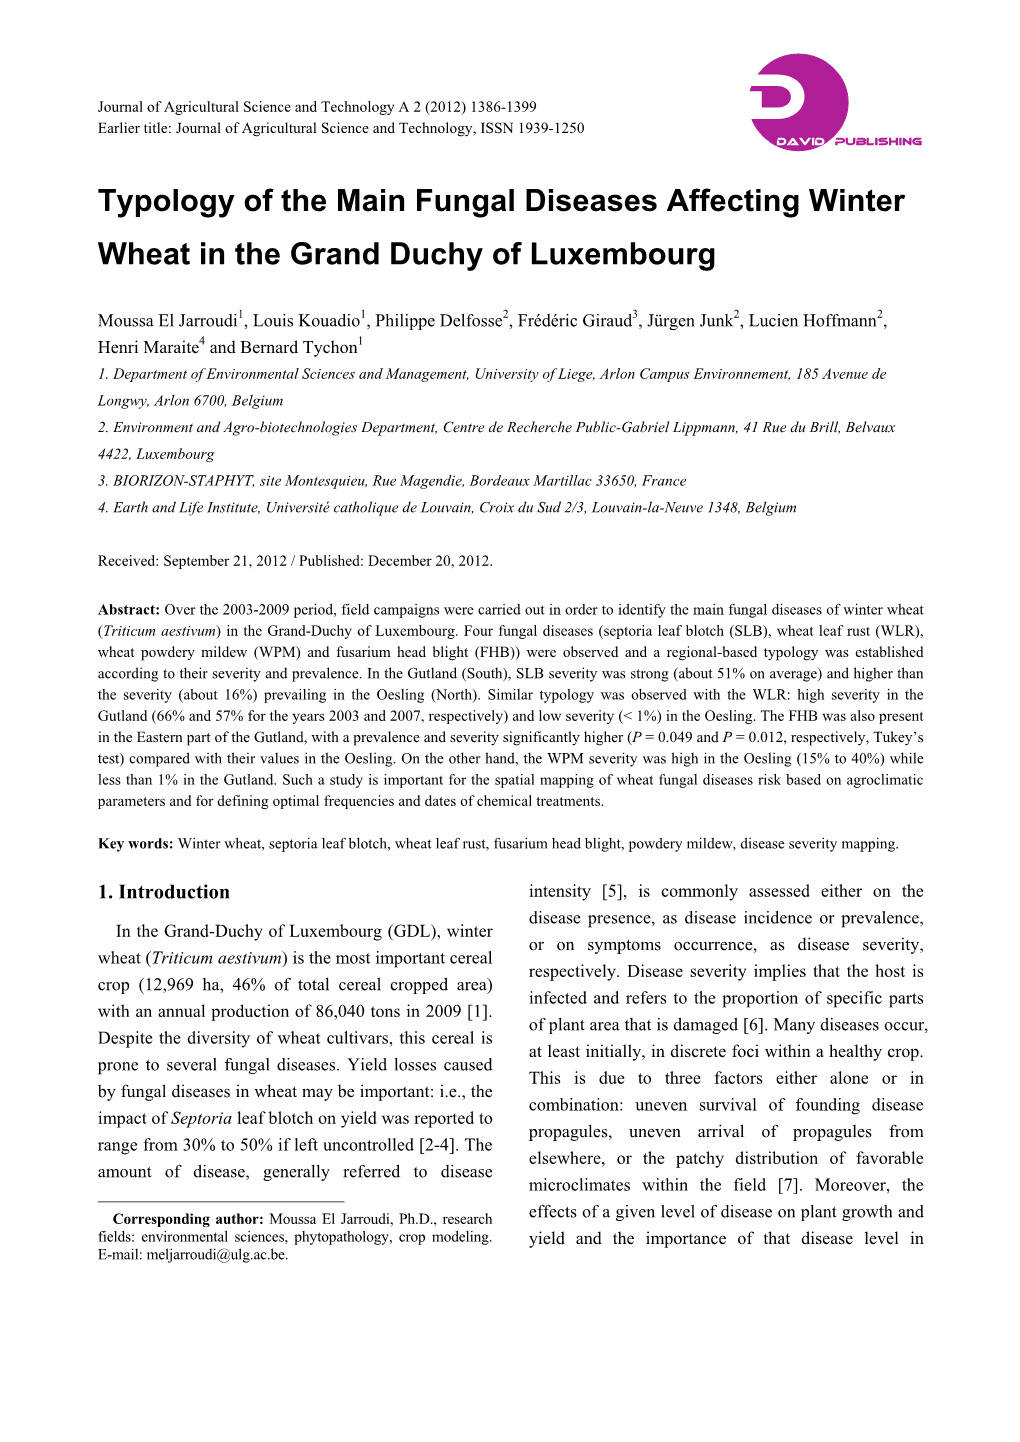 Typology of the Main Fungal Diseases Affecting Winter Wheat in the Grand Duchy of Luxembourg